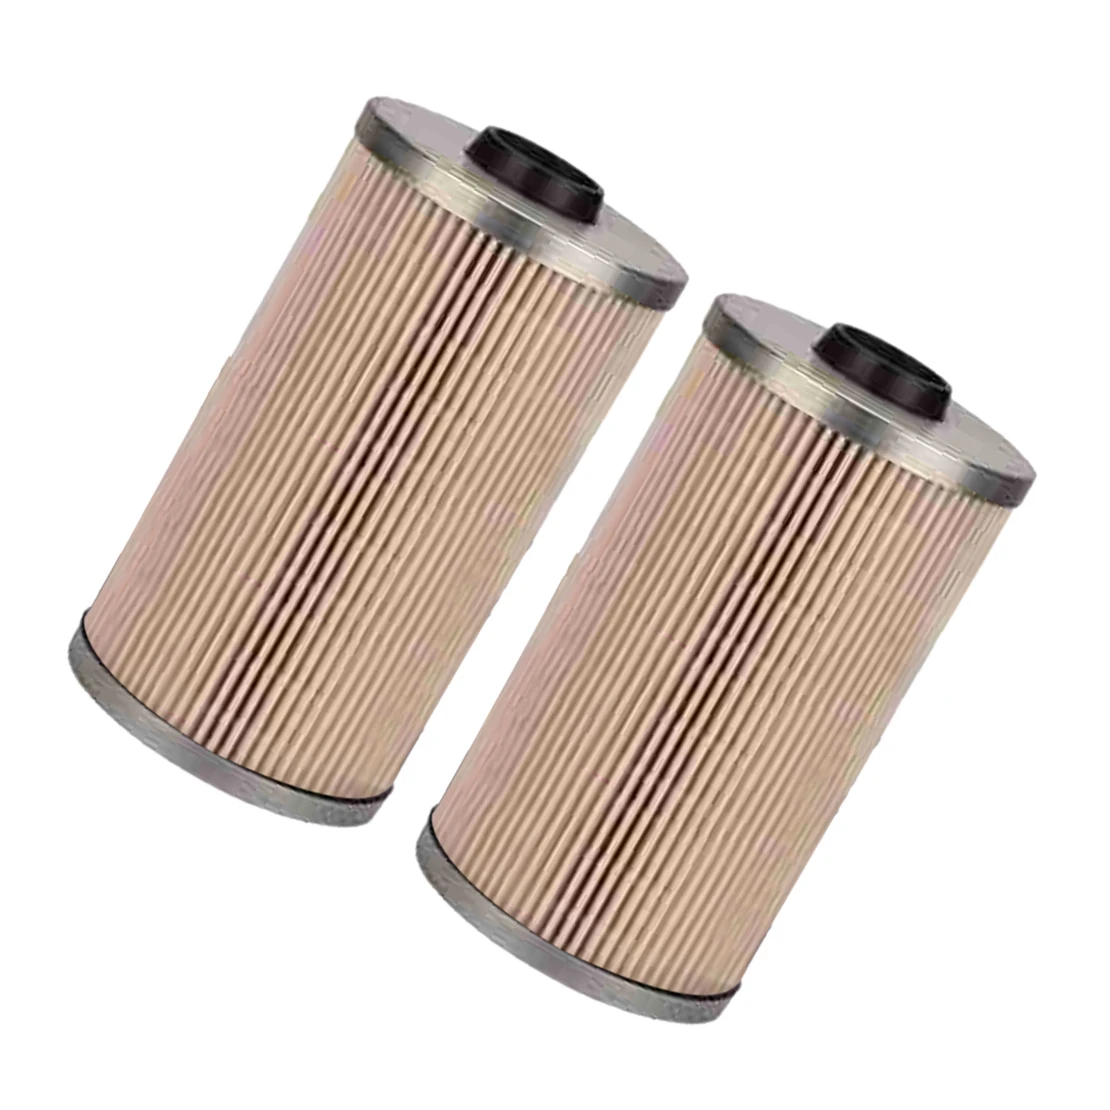 

2Pcs Fuel Oil Water Separator Filters Fit for DAVCO 102528 FH23435 FH23447 FH23448 FS19765 FS19763 PF7930 P550851 FH23453